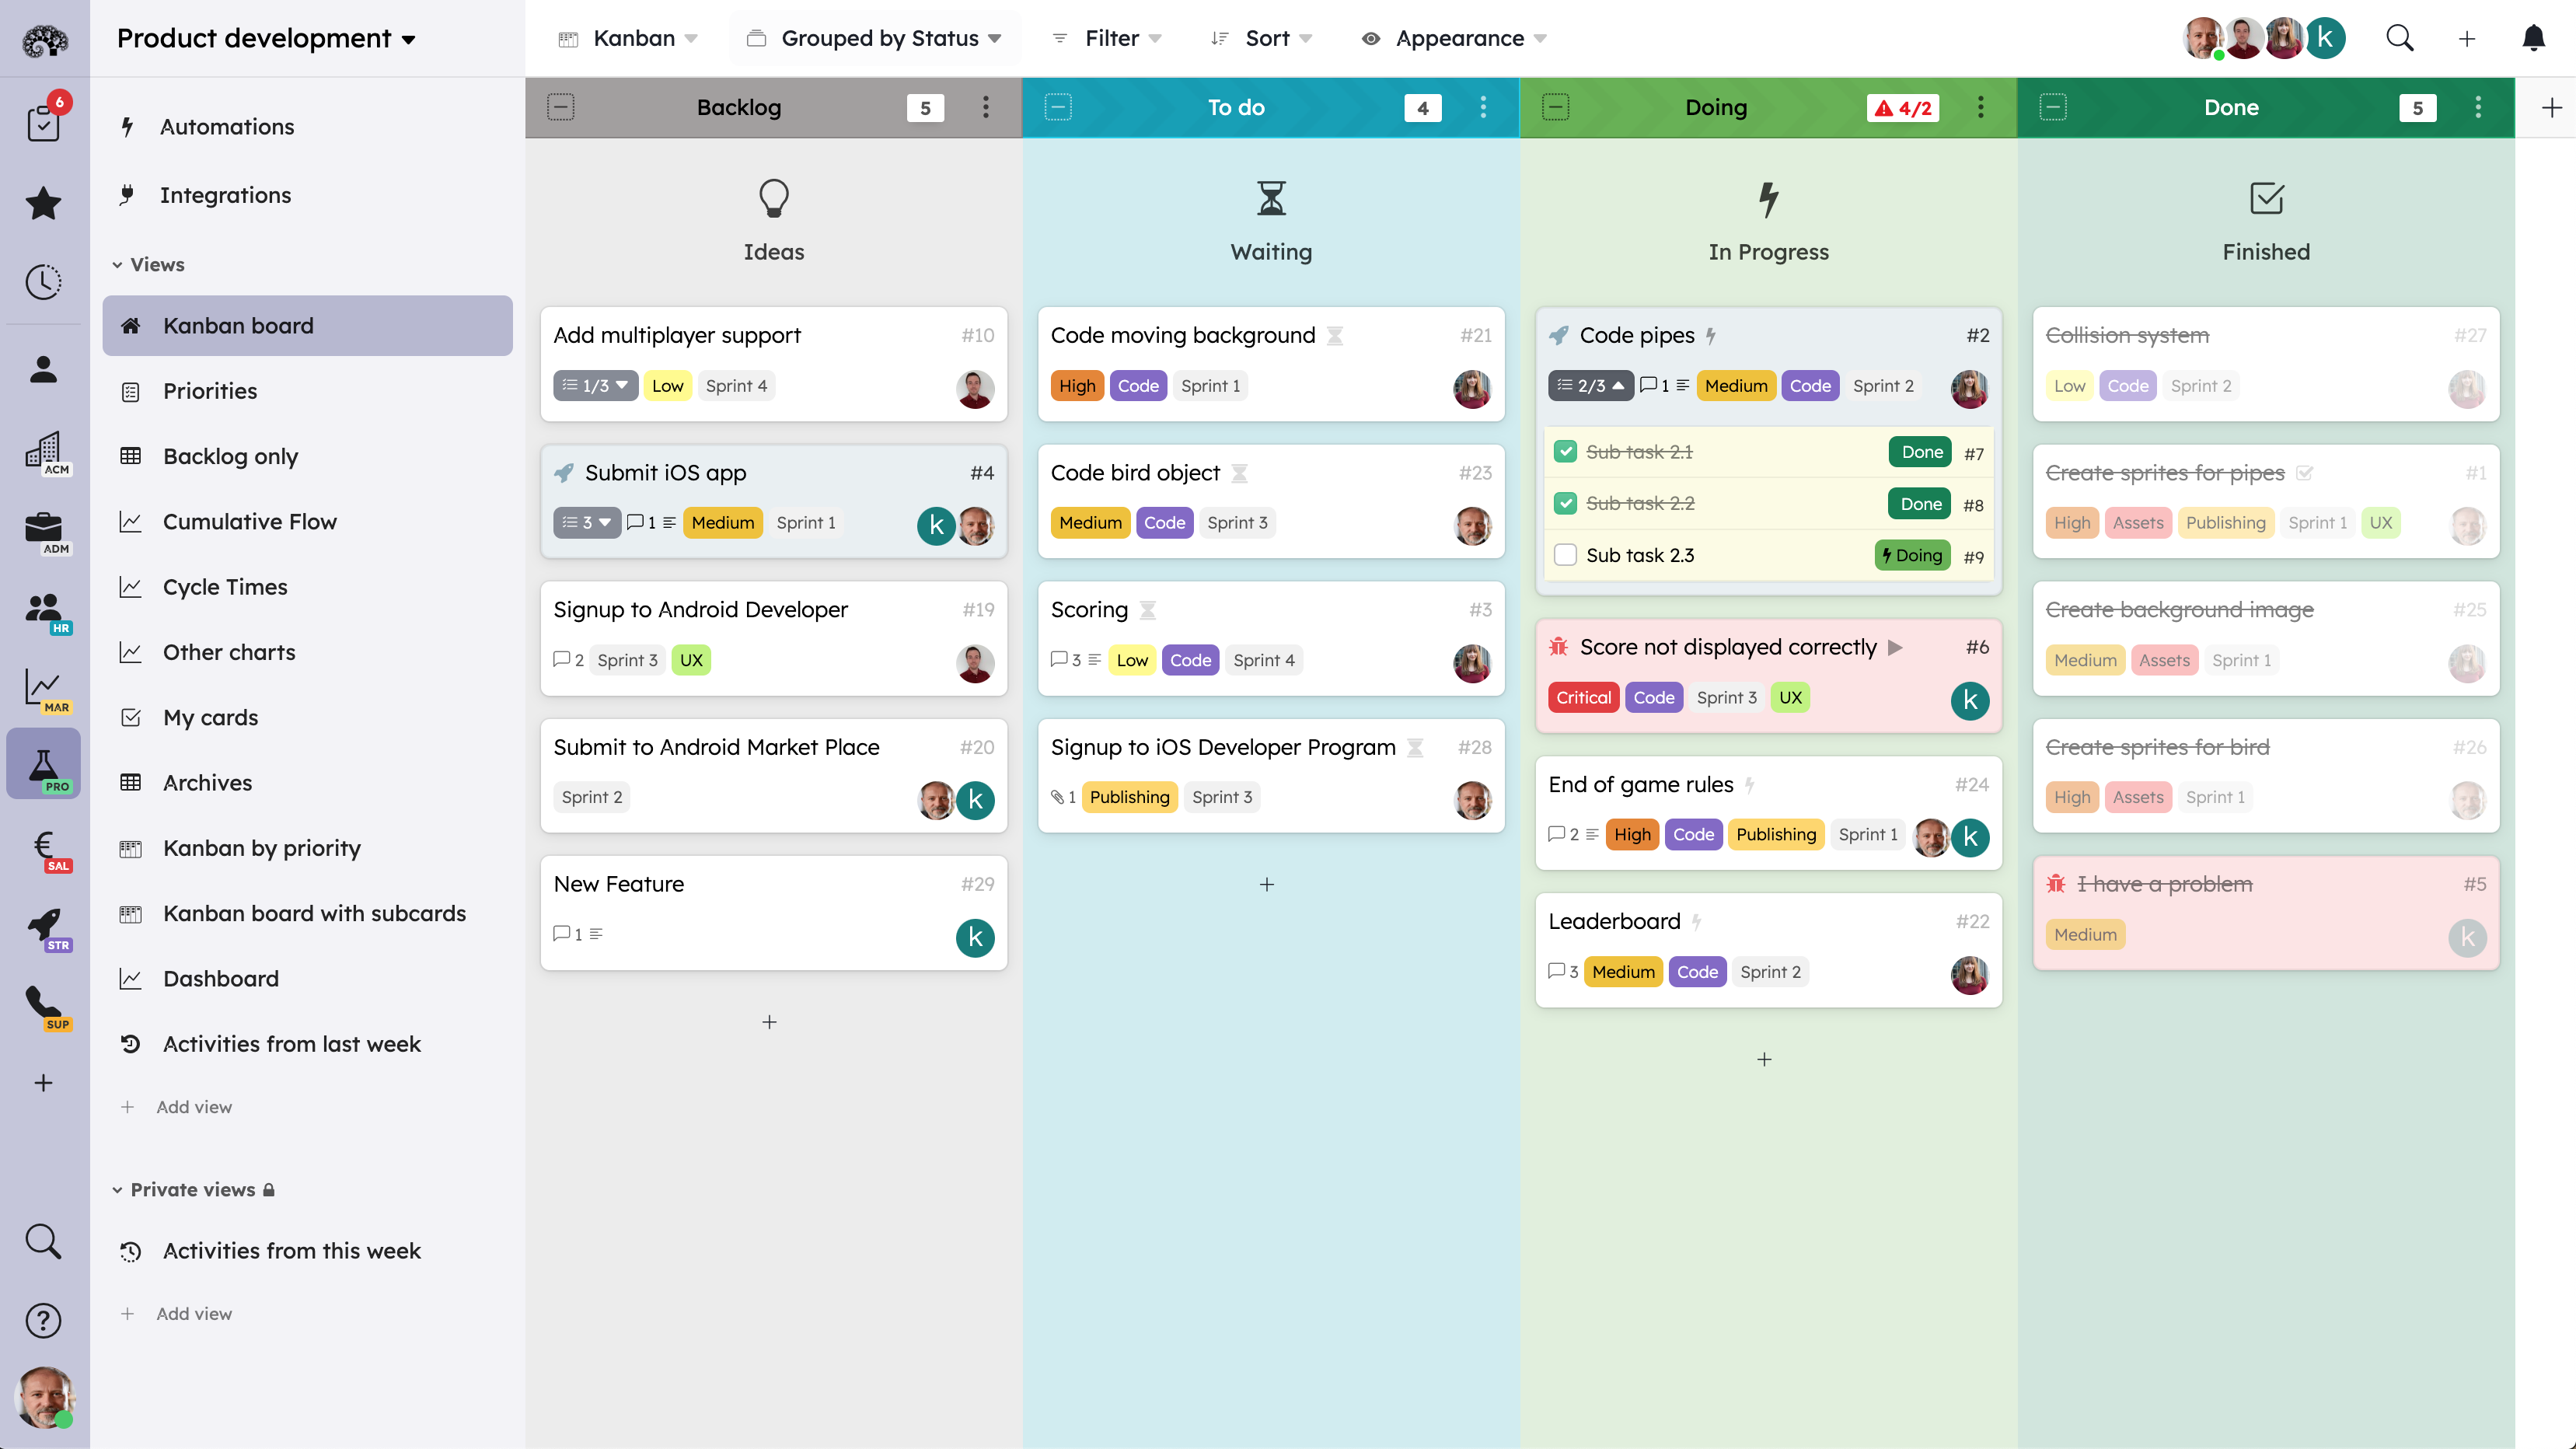 Kanban board: ideal for visualizing workflows